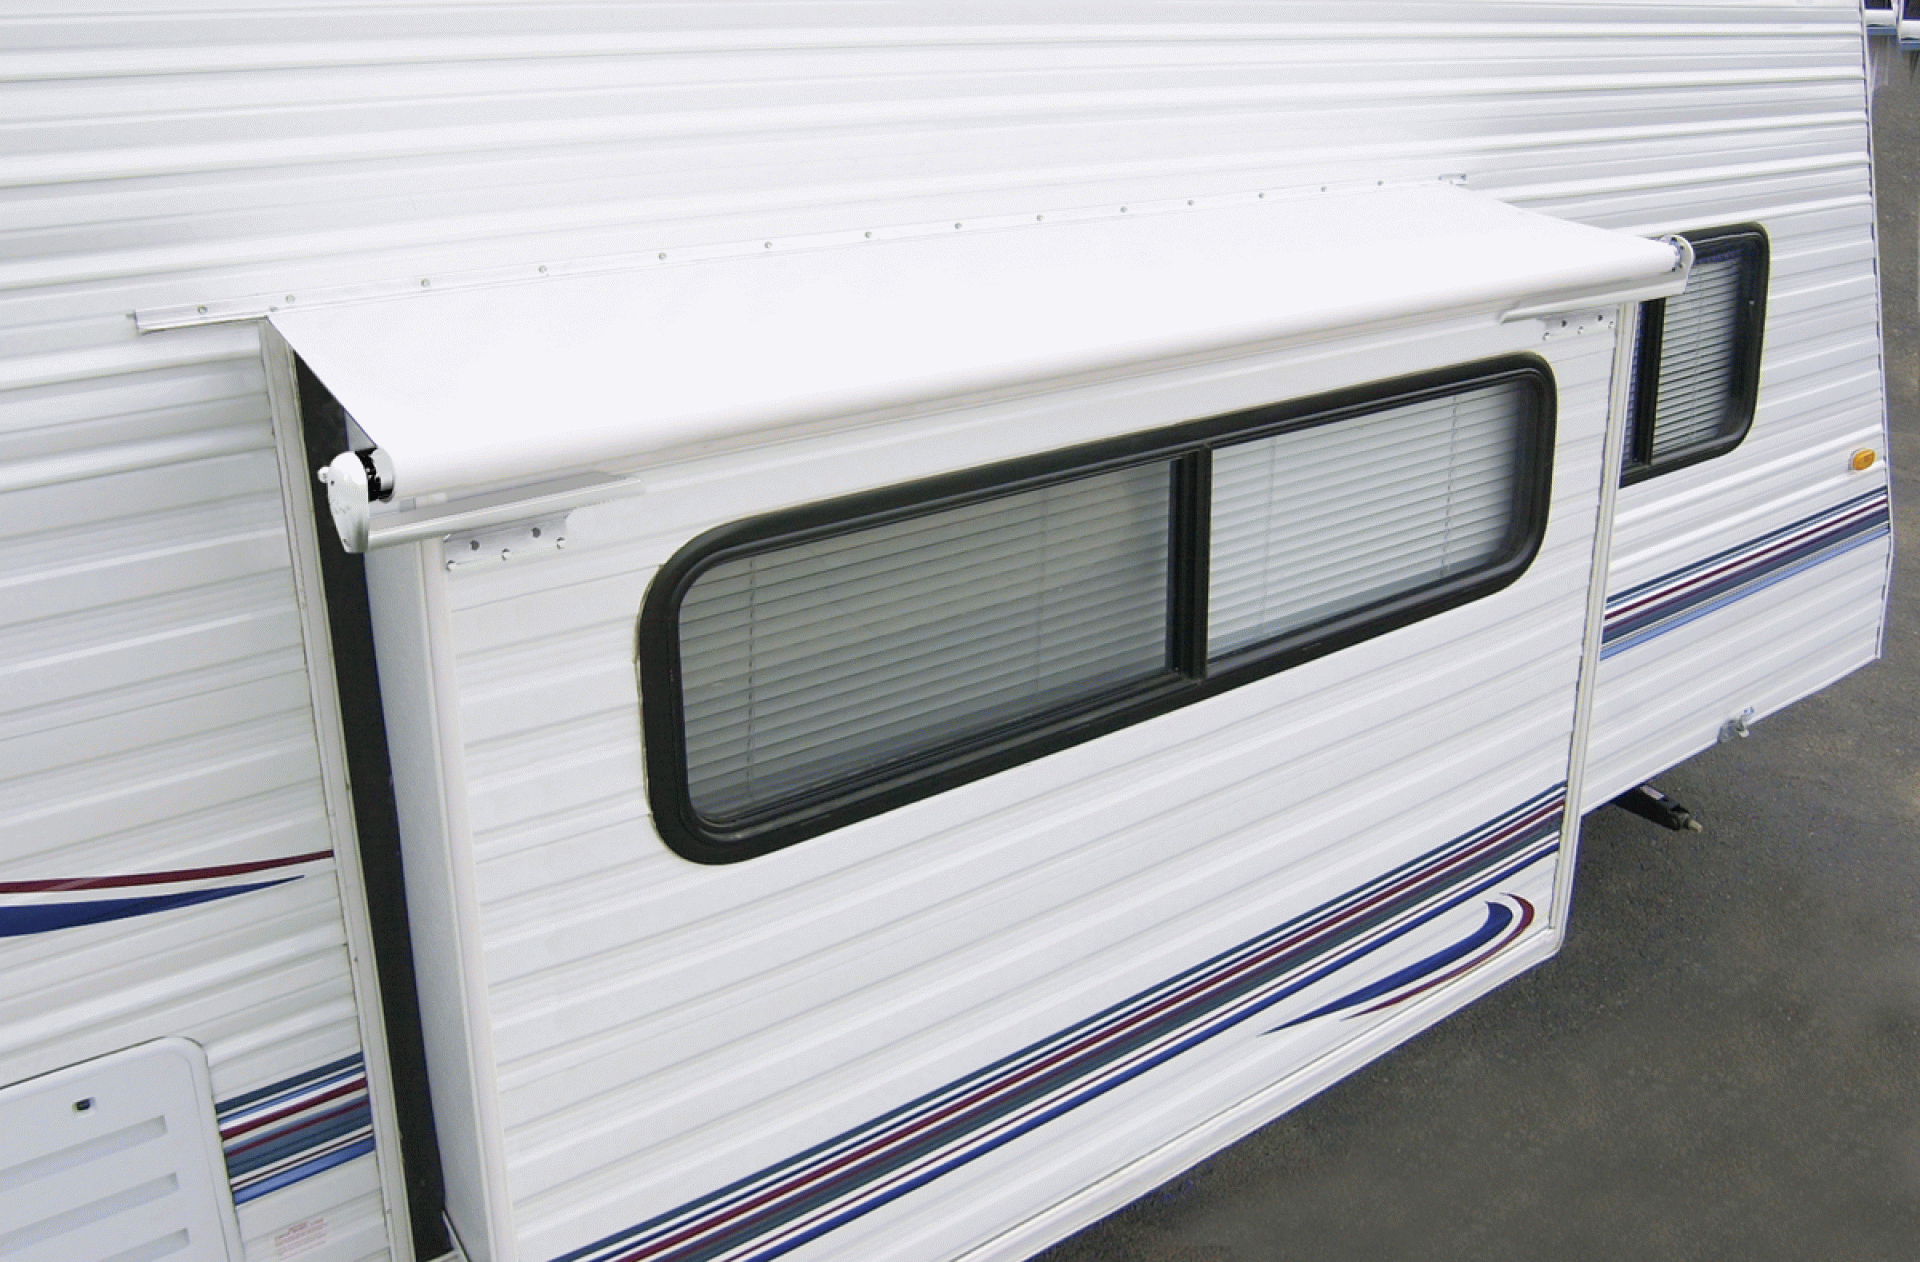 CAREFREE OF COLORADO | LH1456242 | Slideout Cover Awning 138" - 145.9" Roof Range Solid Black Vinyl